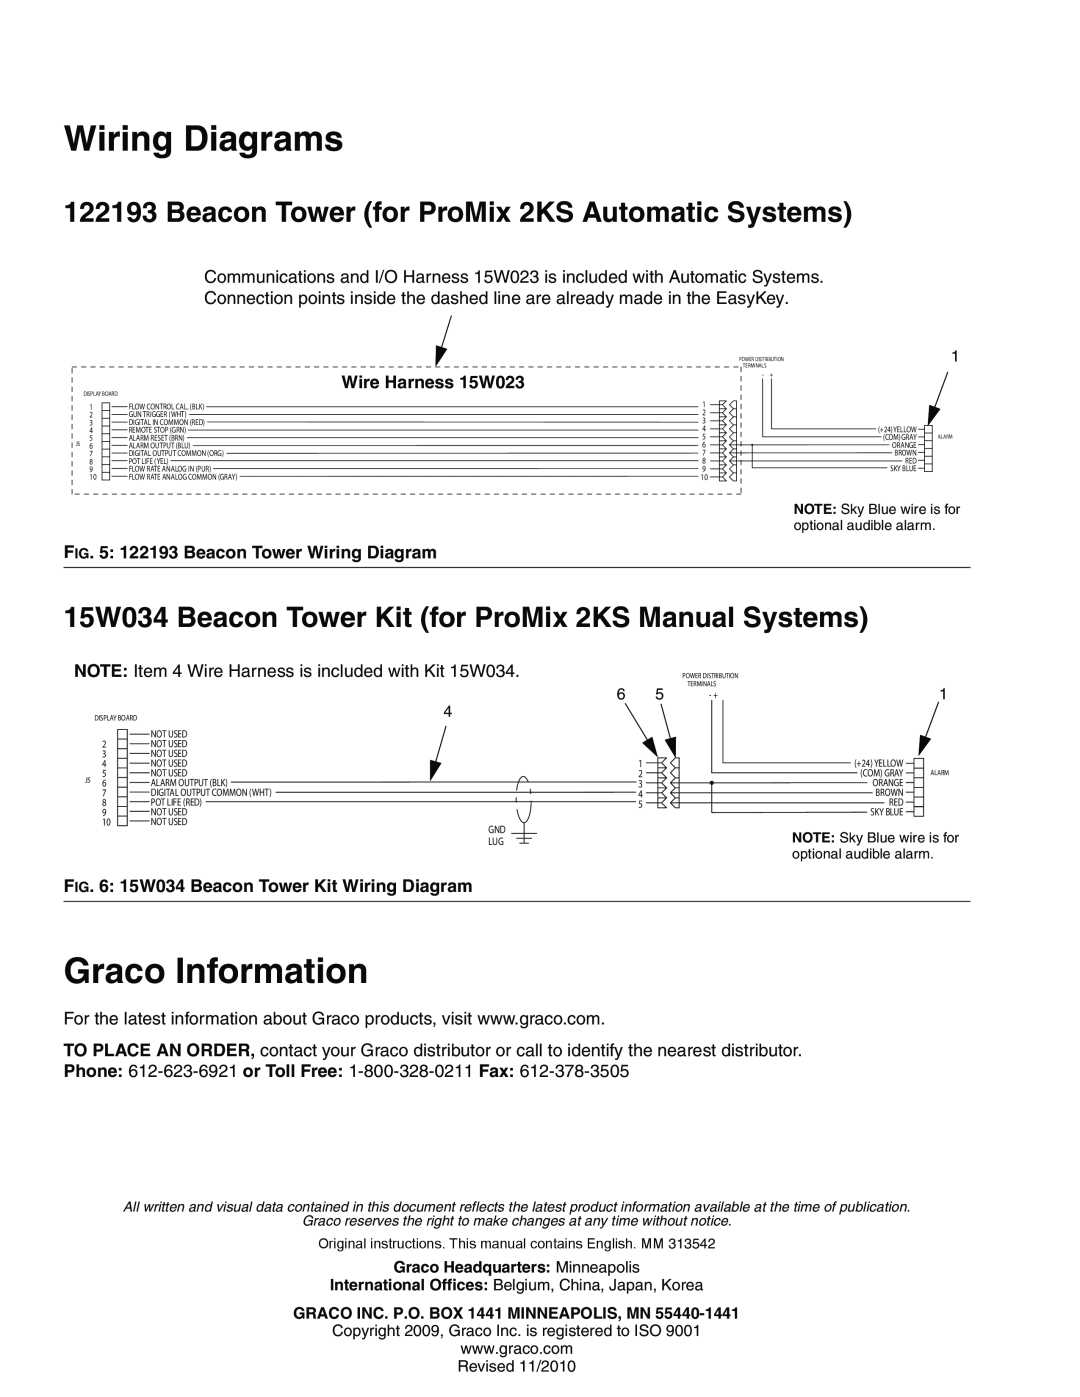 Graco 15W034 Wiring Diagrams, Graco Information, Beacon Tower for ProMix 2KS Automatic Systems, Wire Harness 15W023 